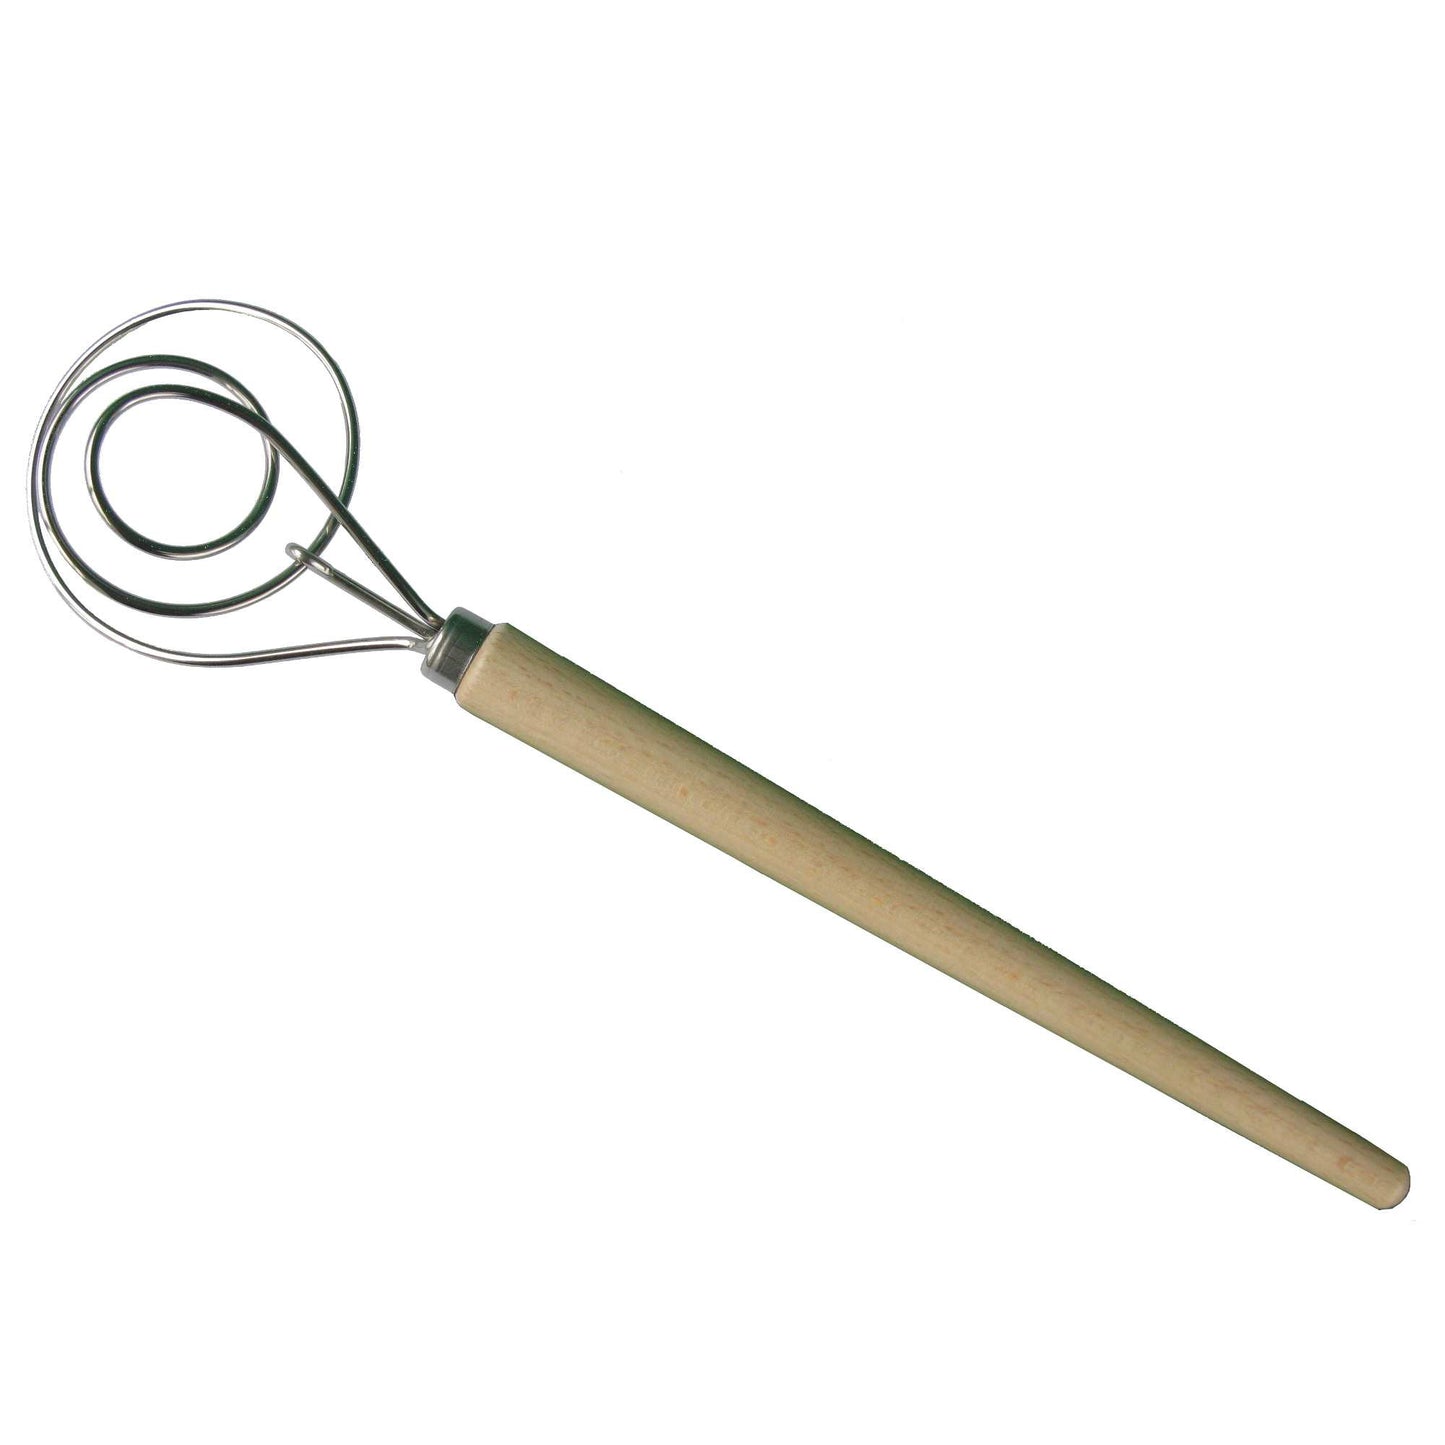 Danish Dough Whisk - MORE ARRIVING EARLY MAY